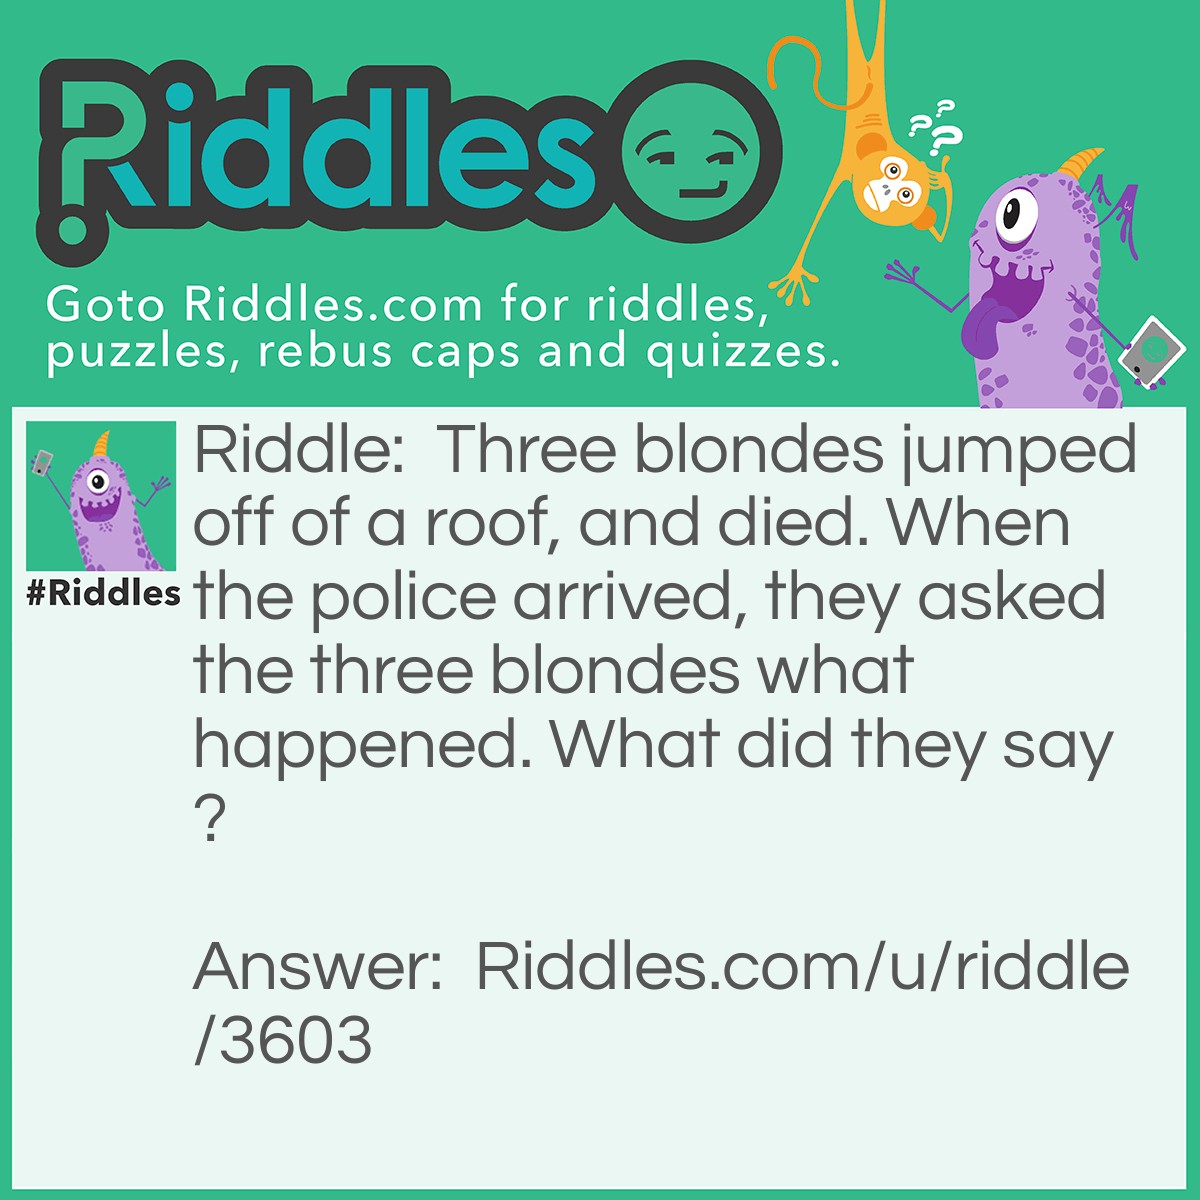 Riddle: Three blondes jumped off of a roof, and died. When the police arrived, they asked the three blondes what happened. What did they say? Answer: Nothing. They were dead.